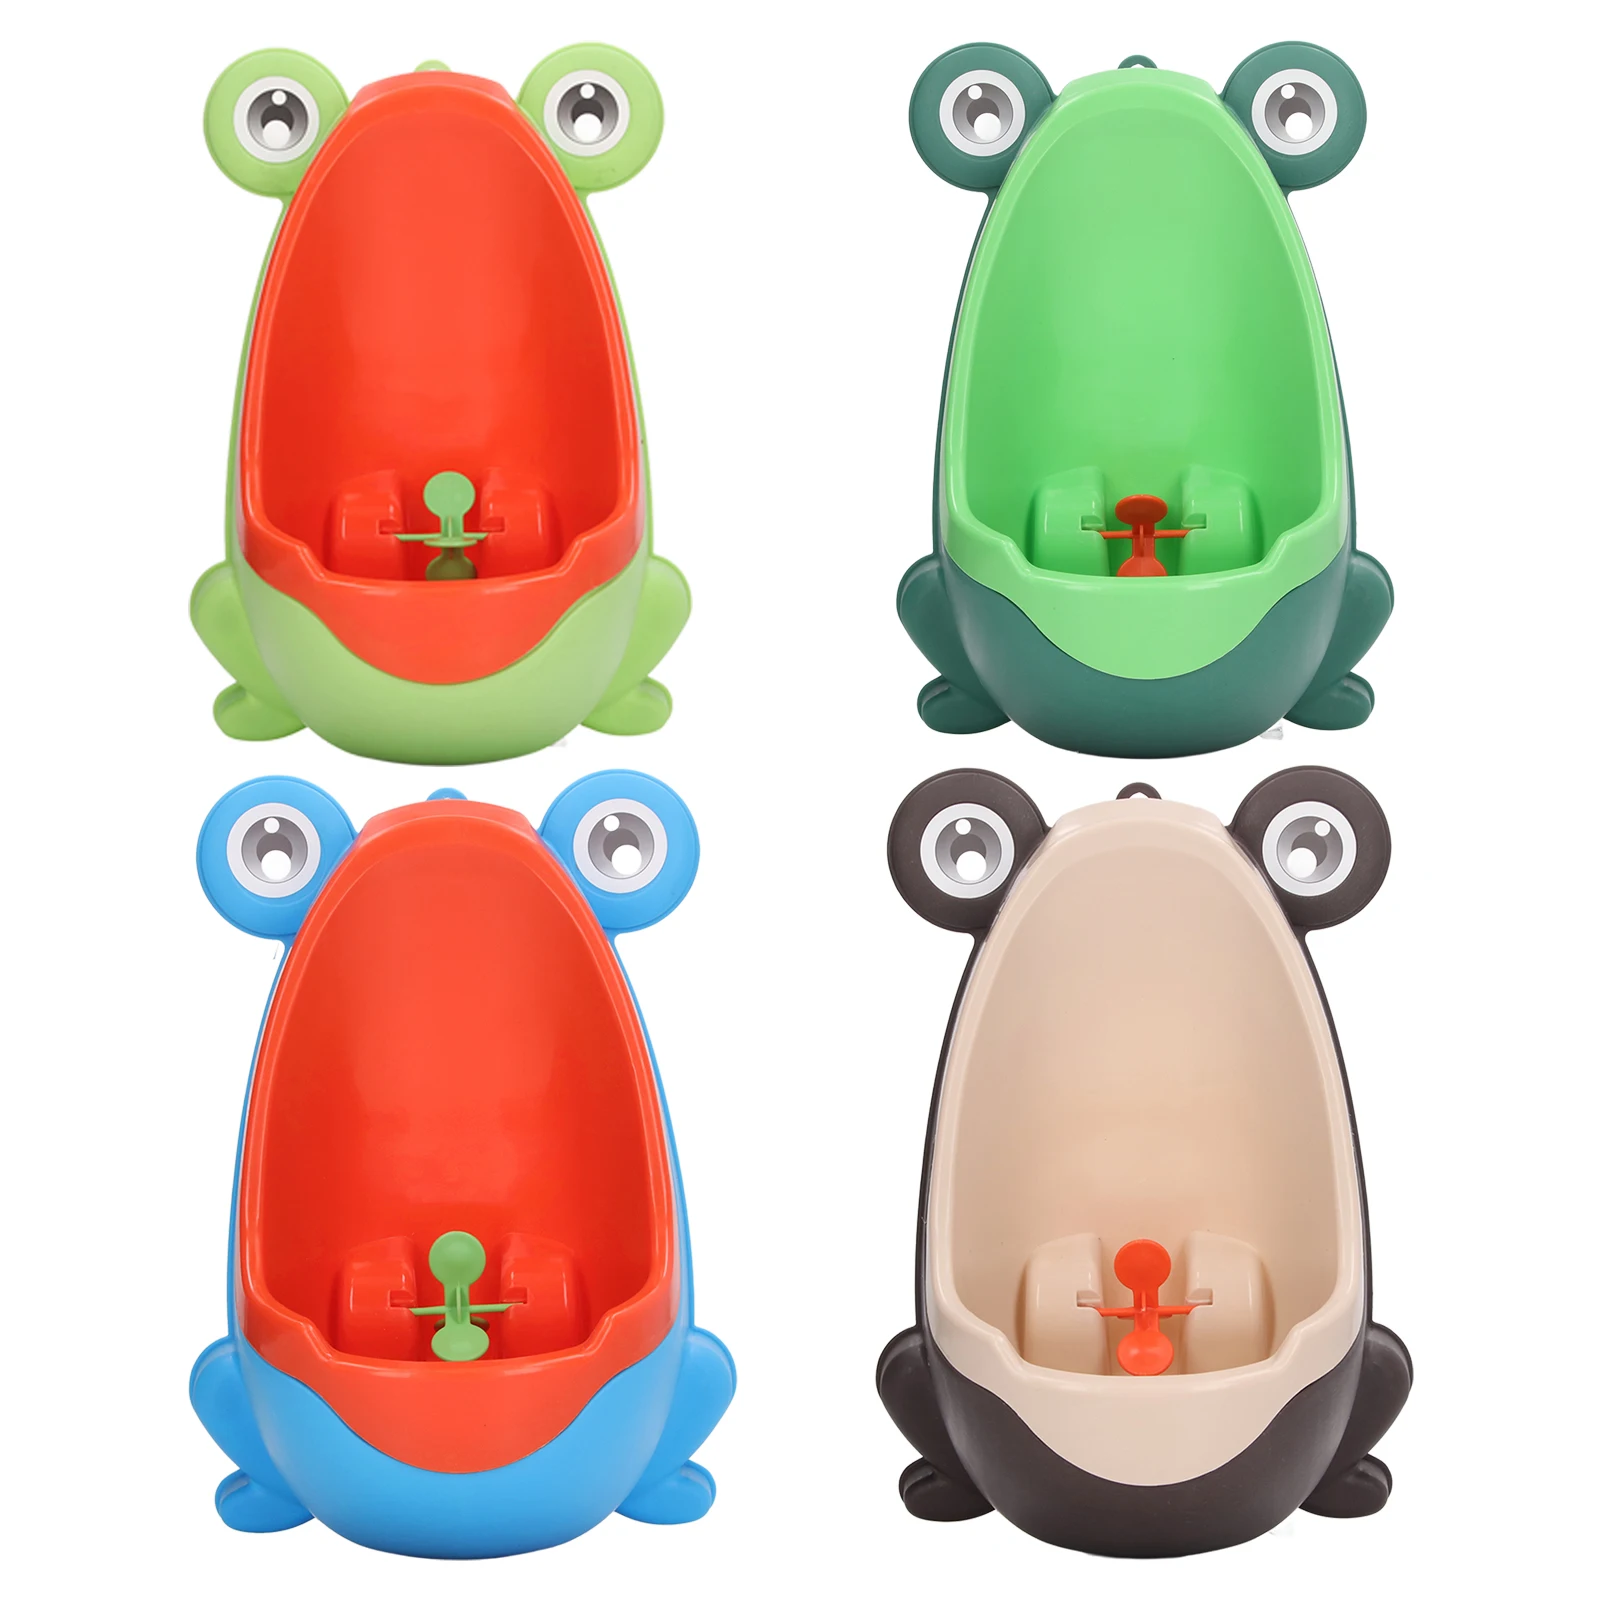 baby potty toilet for children urinal baby potty training seat girls portable toilet bedpan comfortable backrest cartoon pots Baby Boys Standing Potty Shape Wall-Mounted Urinals Toilet Training Children Stand Vertical Urinal Potty